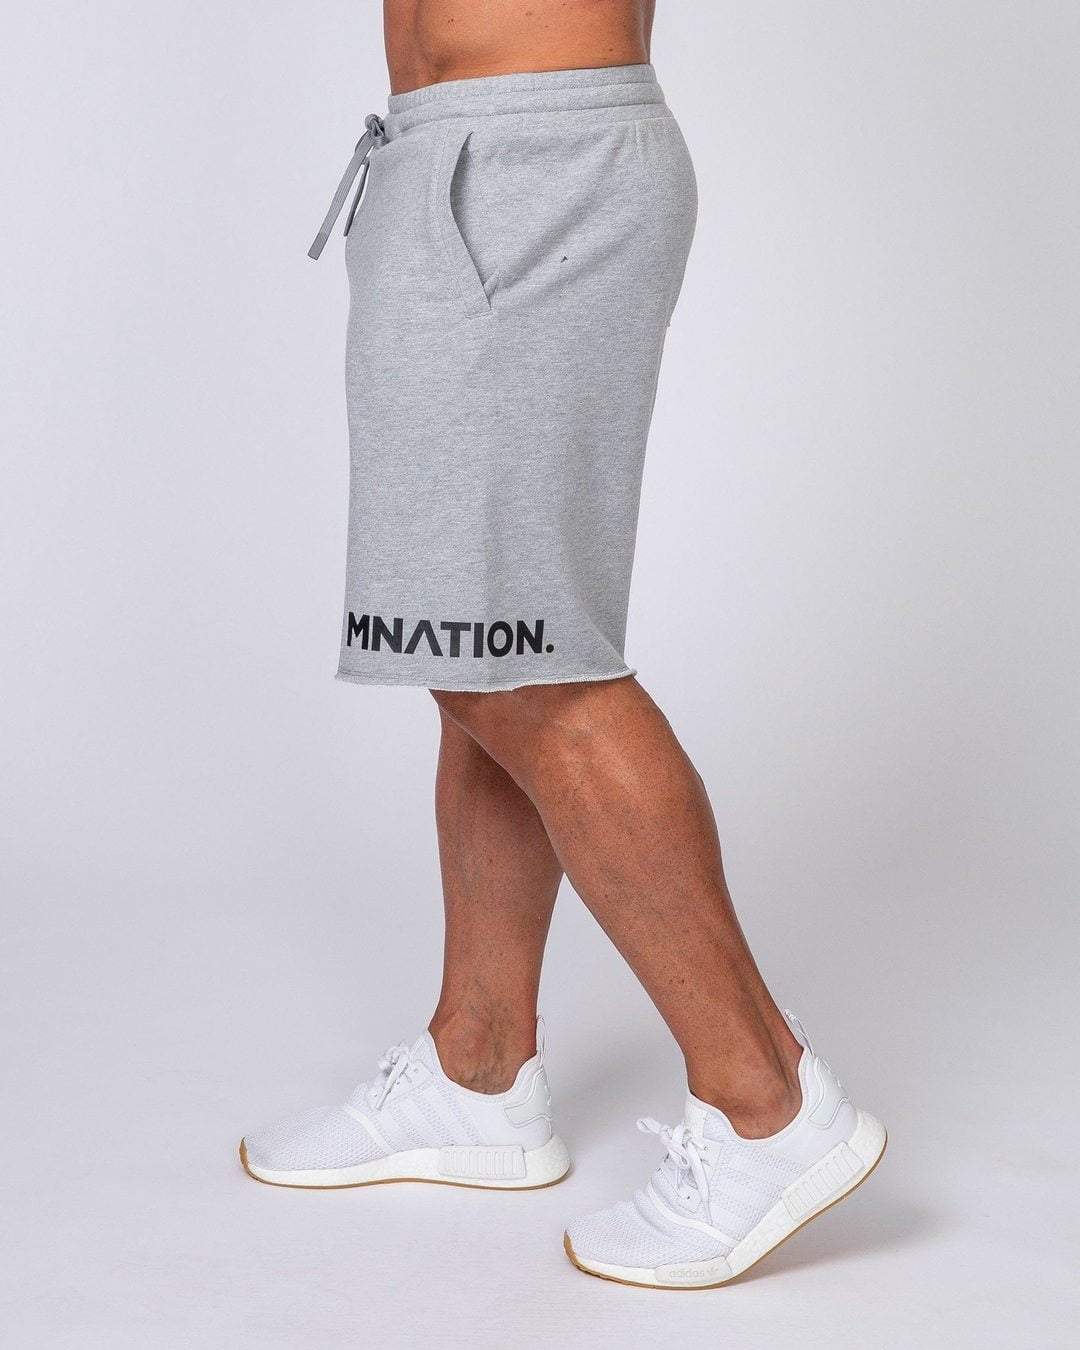 musclenation Mens Relaxed Shorts - Grey